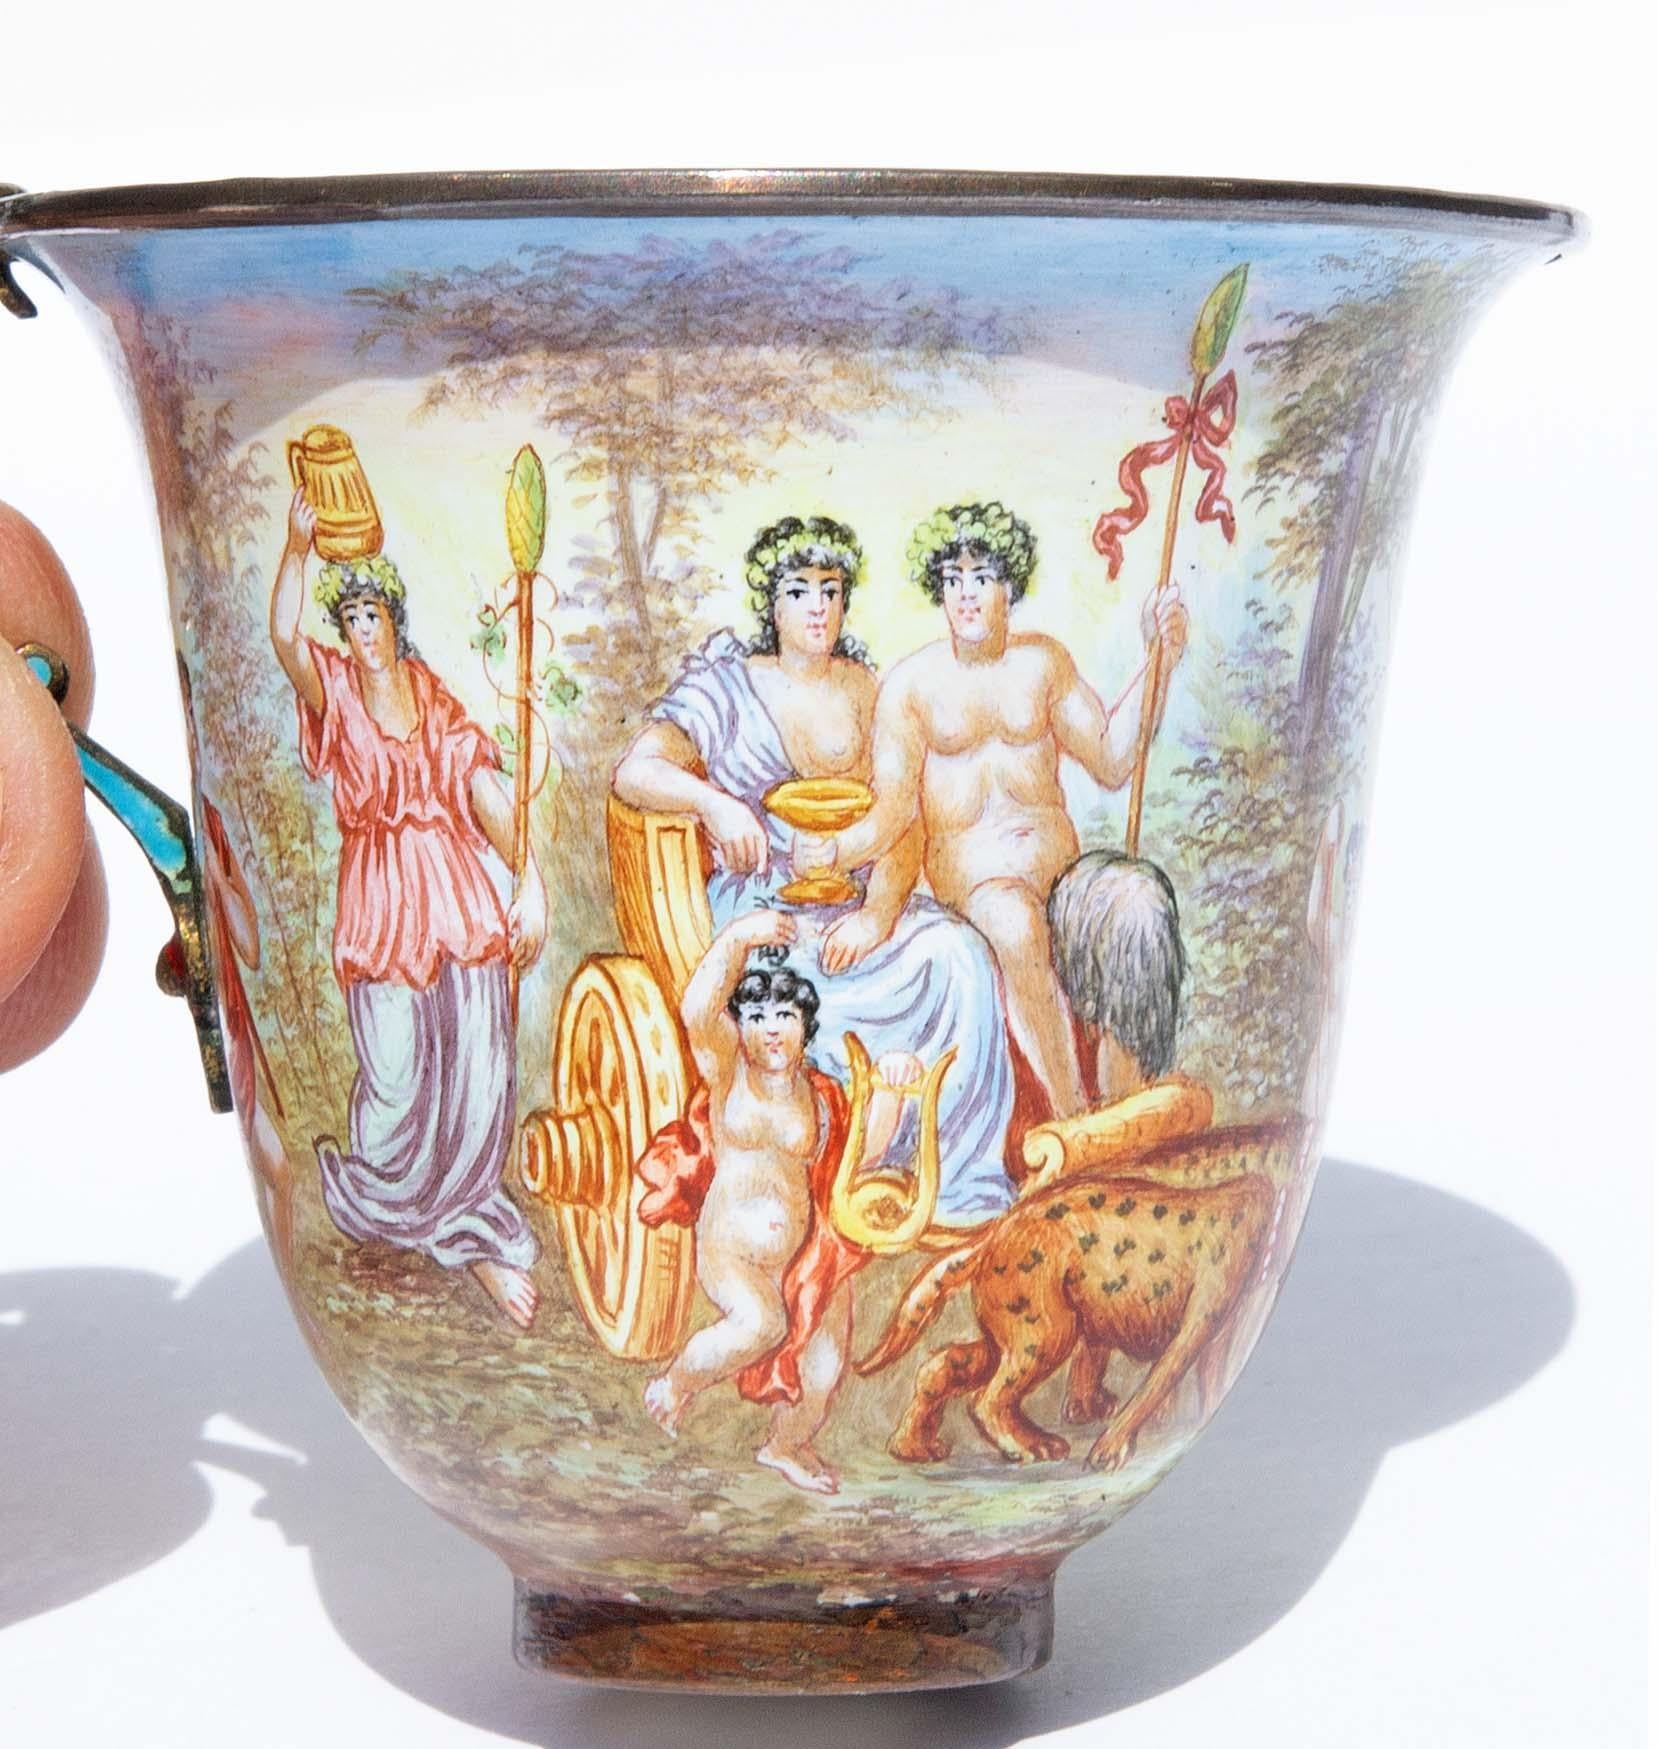 Two finely painted Vienna enameled silver pieces. Includes a cup with Bacchanalian scene and a ewer or vase dreaming maiden. Ewer measures 4.5